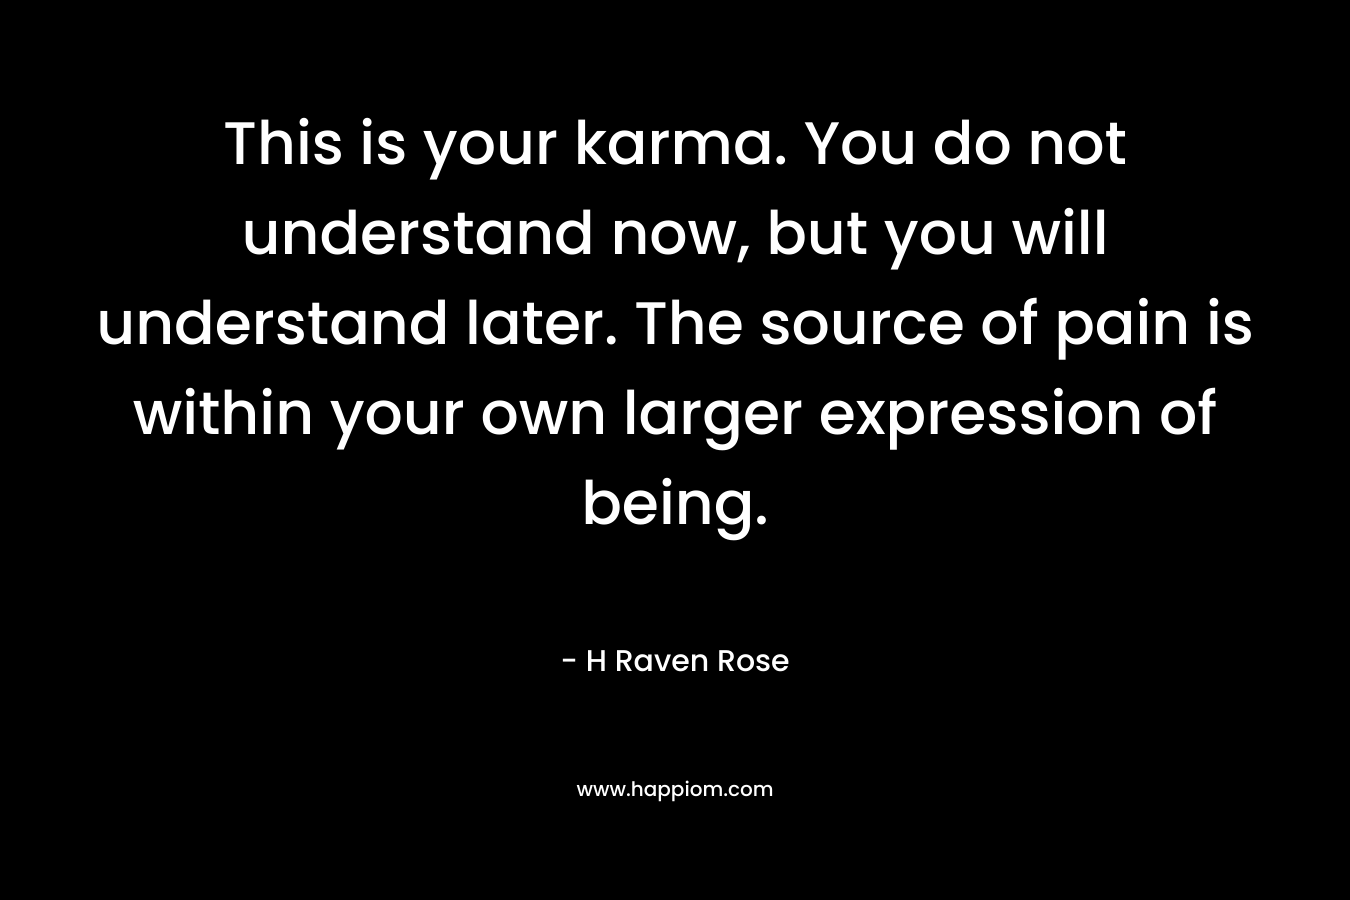 This is your karma. You do not understand now, but you will understand later. The source of pain is within your own larger expression of being. – H Raven Rose